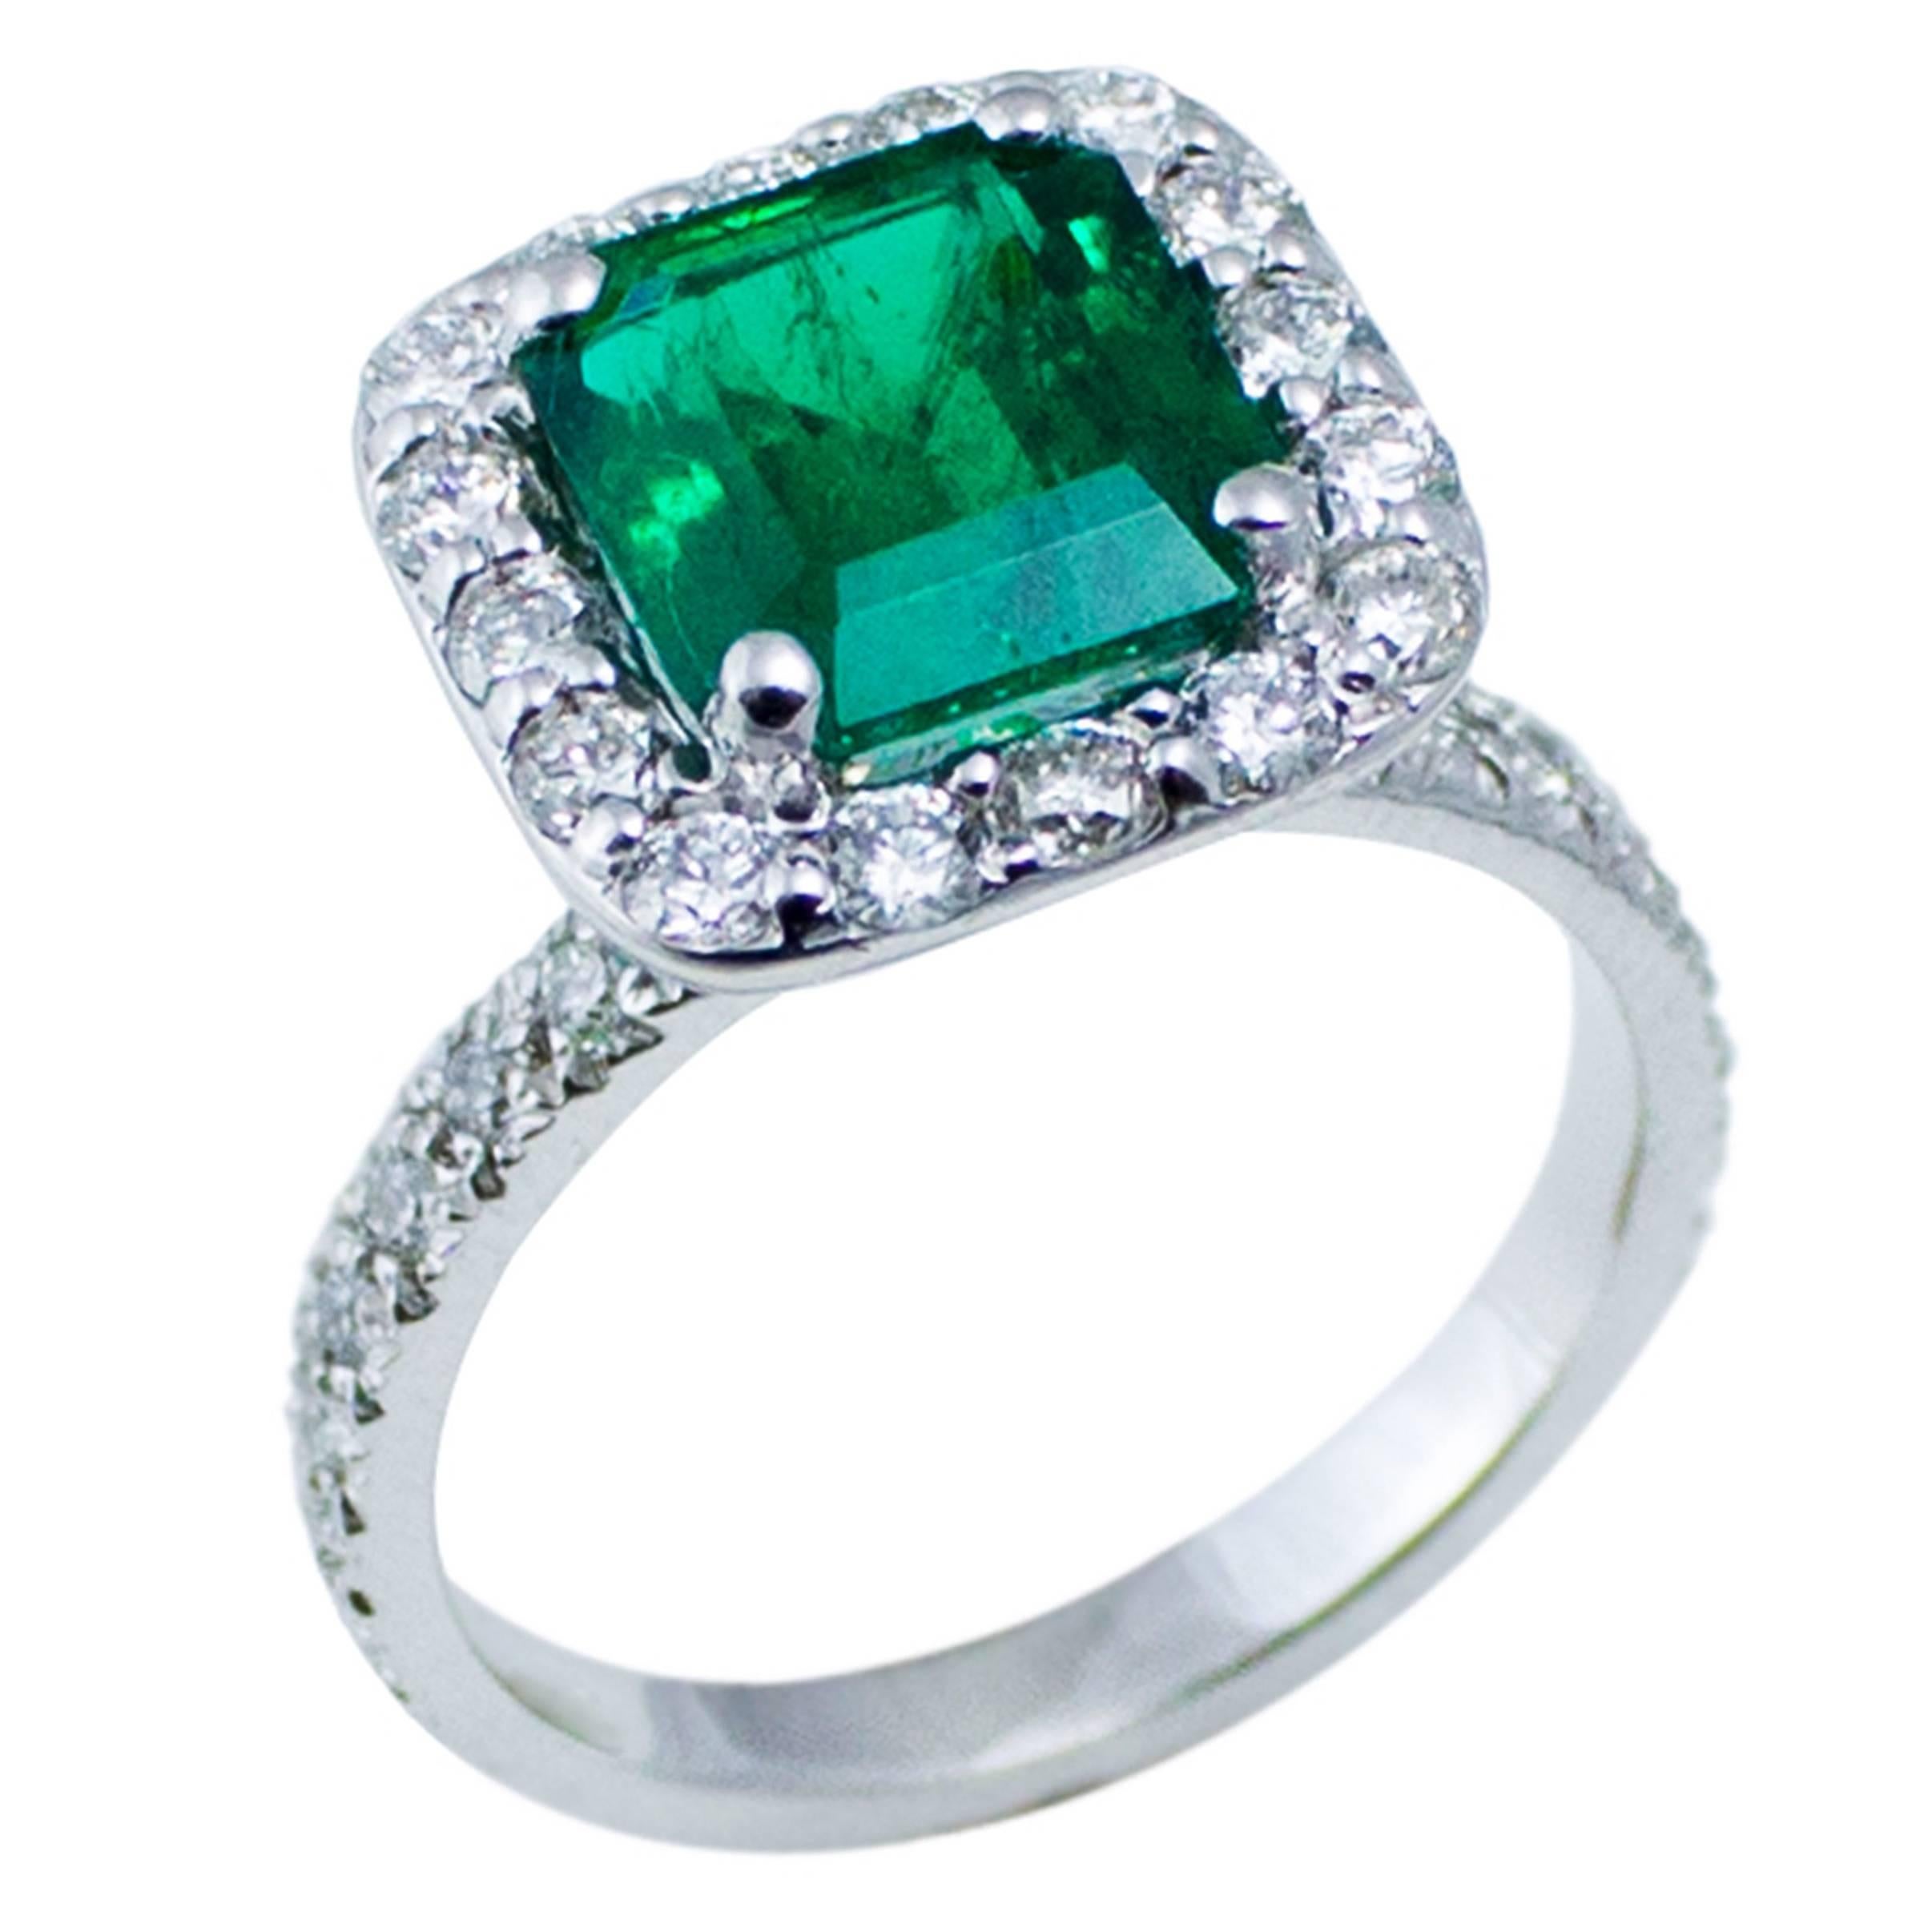 Contemporary GIA Certified Colombian Emerald Diamond Platinum Cocktail Ring 2.89 Carats